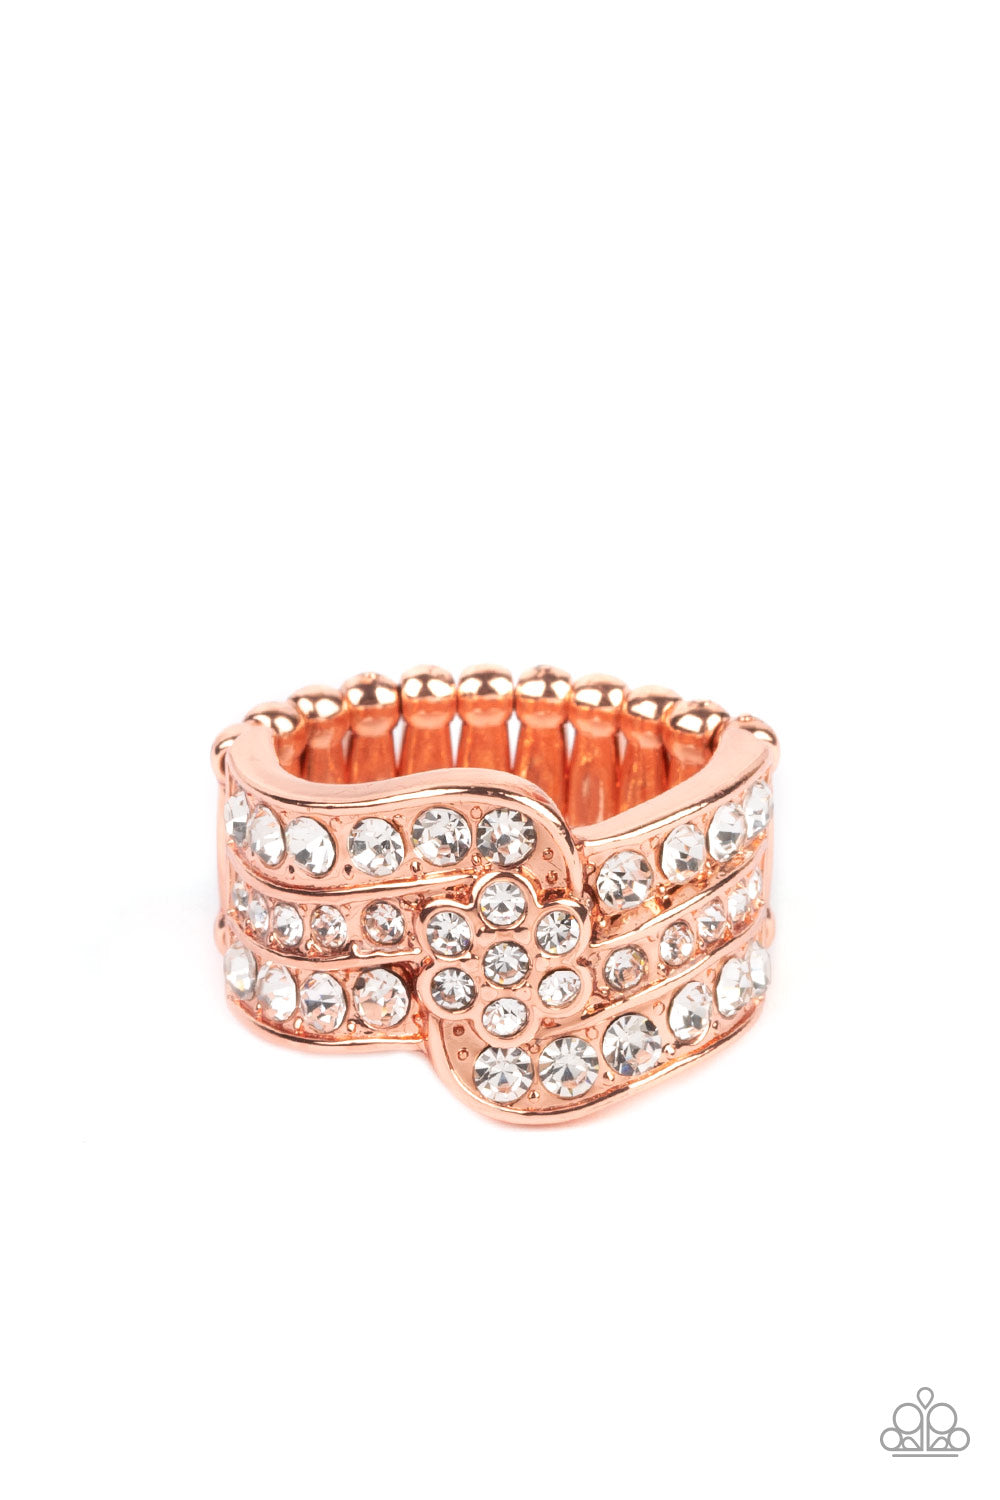 Paparazzi “No Flowers Barred” Copper Stretch Ring